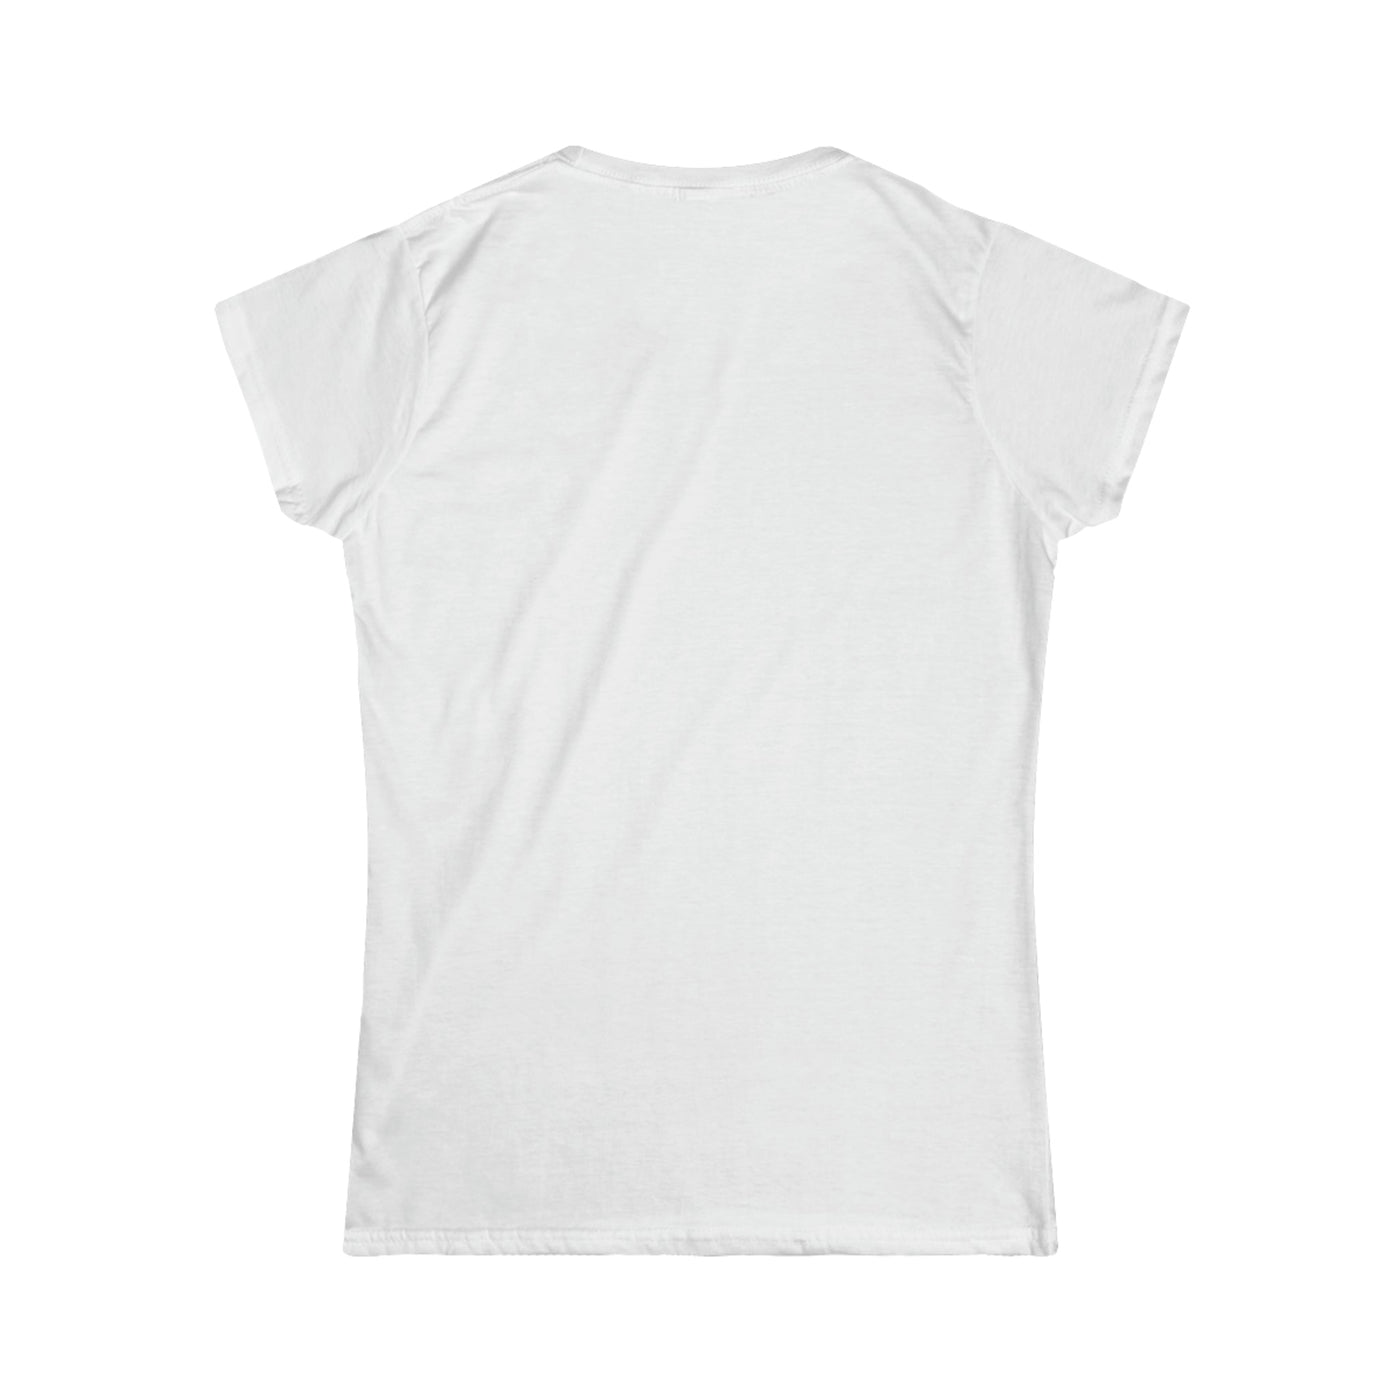 Defeated Queen 22 Women's Softstyle White T-Shirt - Ozzell London